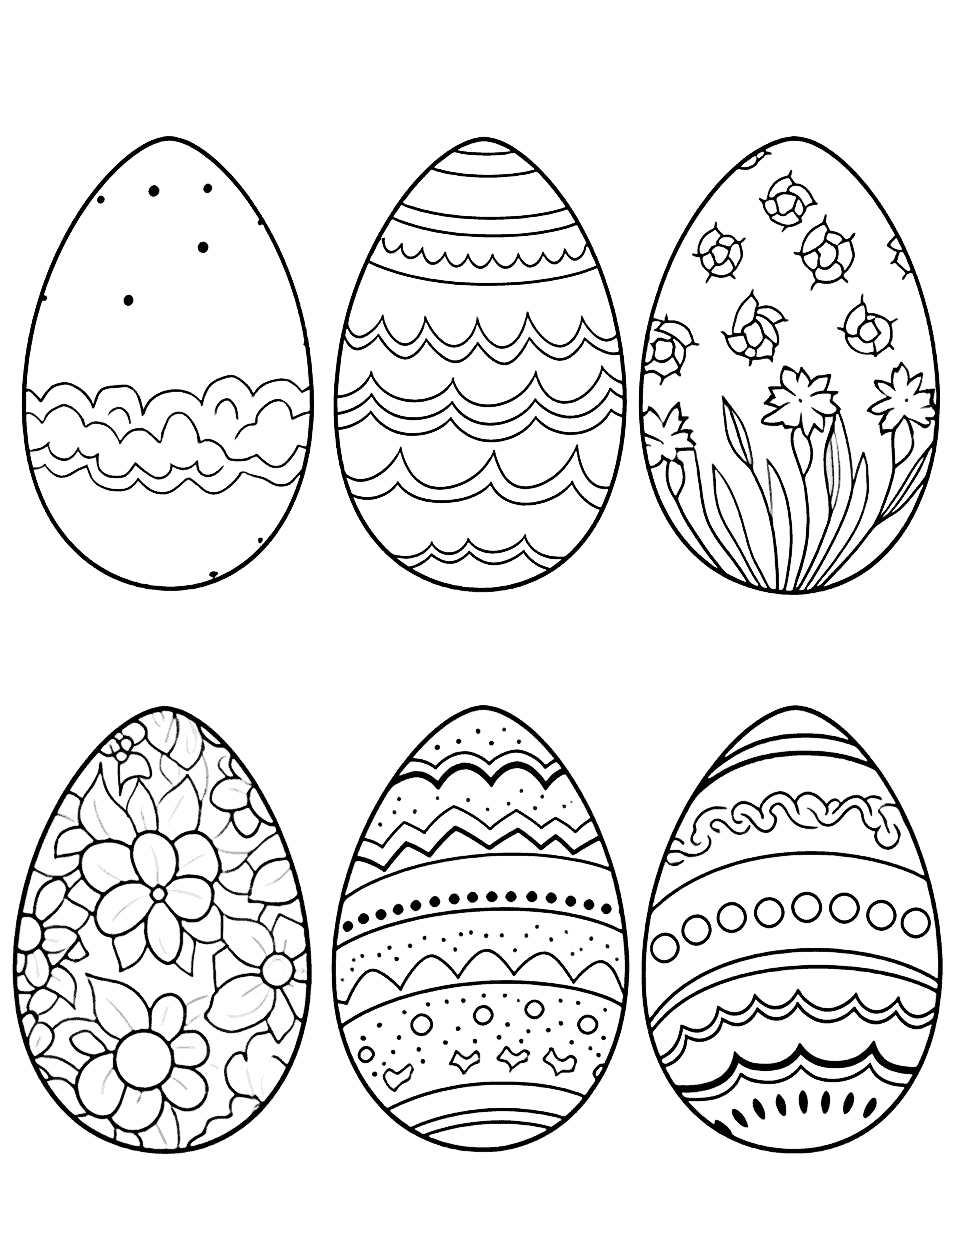 Easter Egg Collage Coloring Page - A collage of various Easter eggs, each uniquely designed with different patterns, shapes, and colors, offering a creative and vibrant coloring experience.